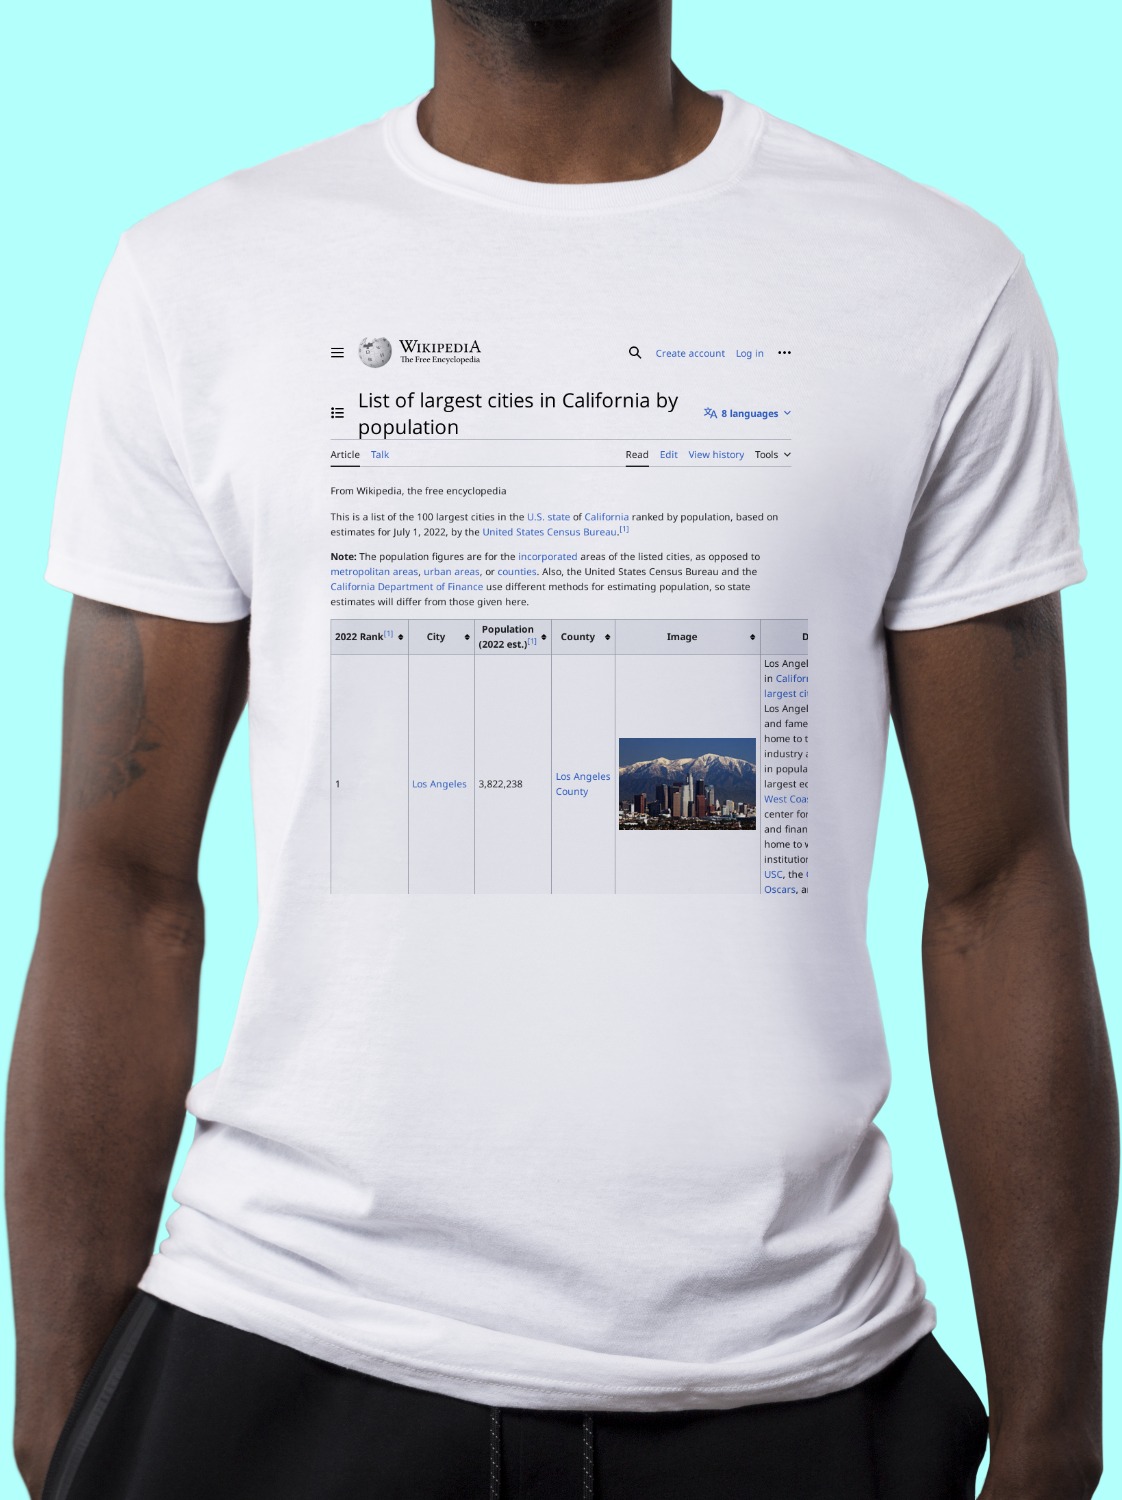 list-of-largest-california-cities-by-population-wikipedia-t-shirt